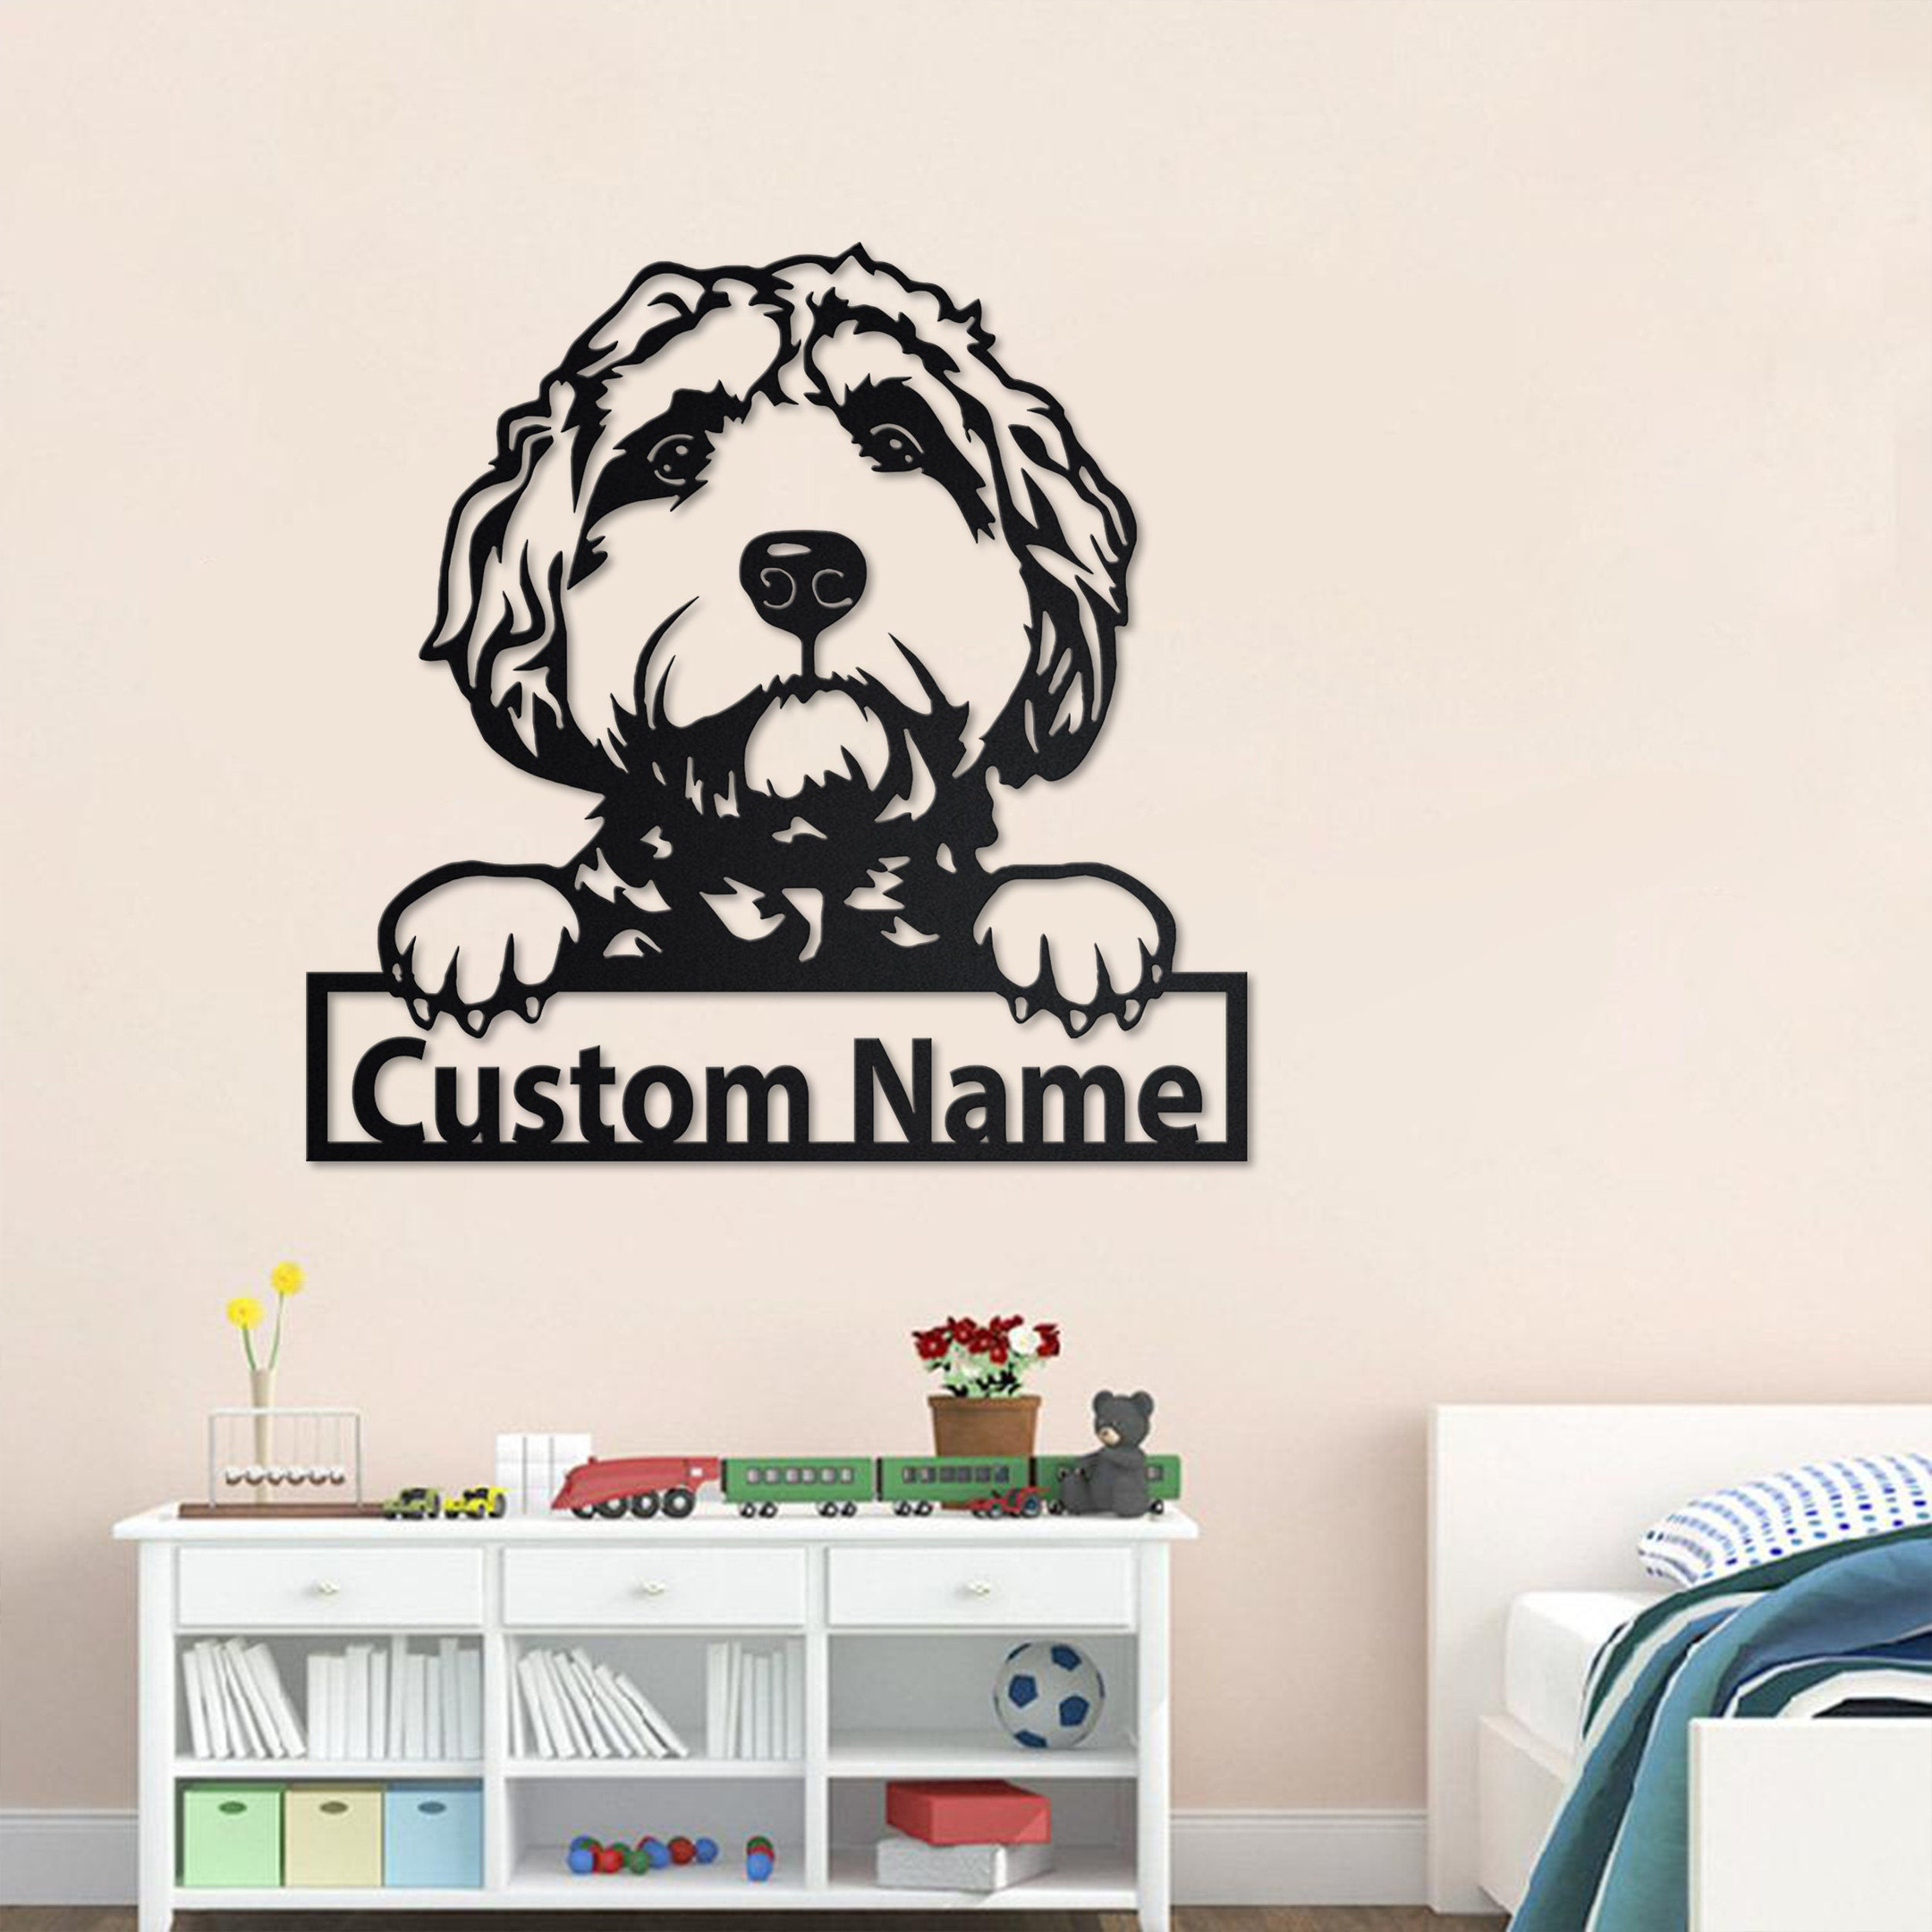 Personalized Goldendoodle Metal Sign, Goldendoodle Metal Wall Art, Dog Metal Sign, Goldendoodle Gift, Goldendoodle Lover Gift Goldendoodle Laser Cut Metal Signs Custom Gift Ideas 18x18IN